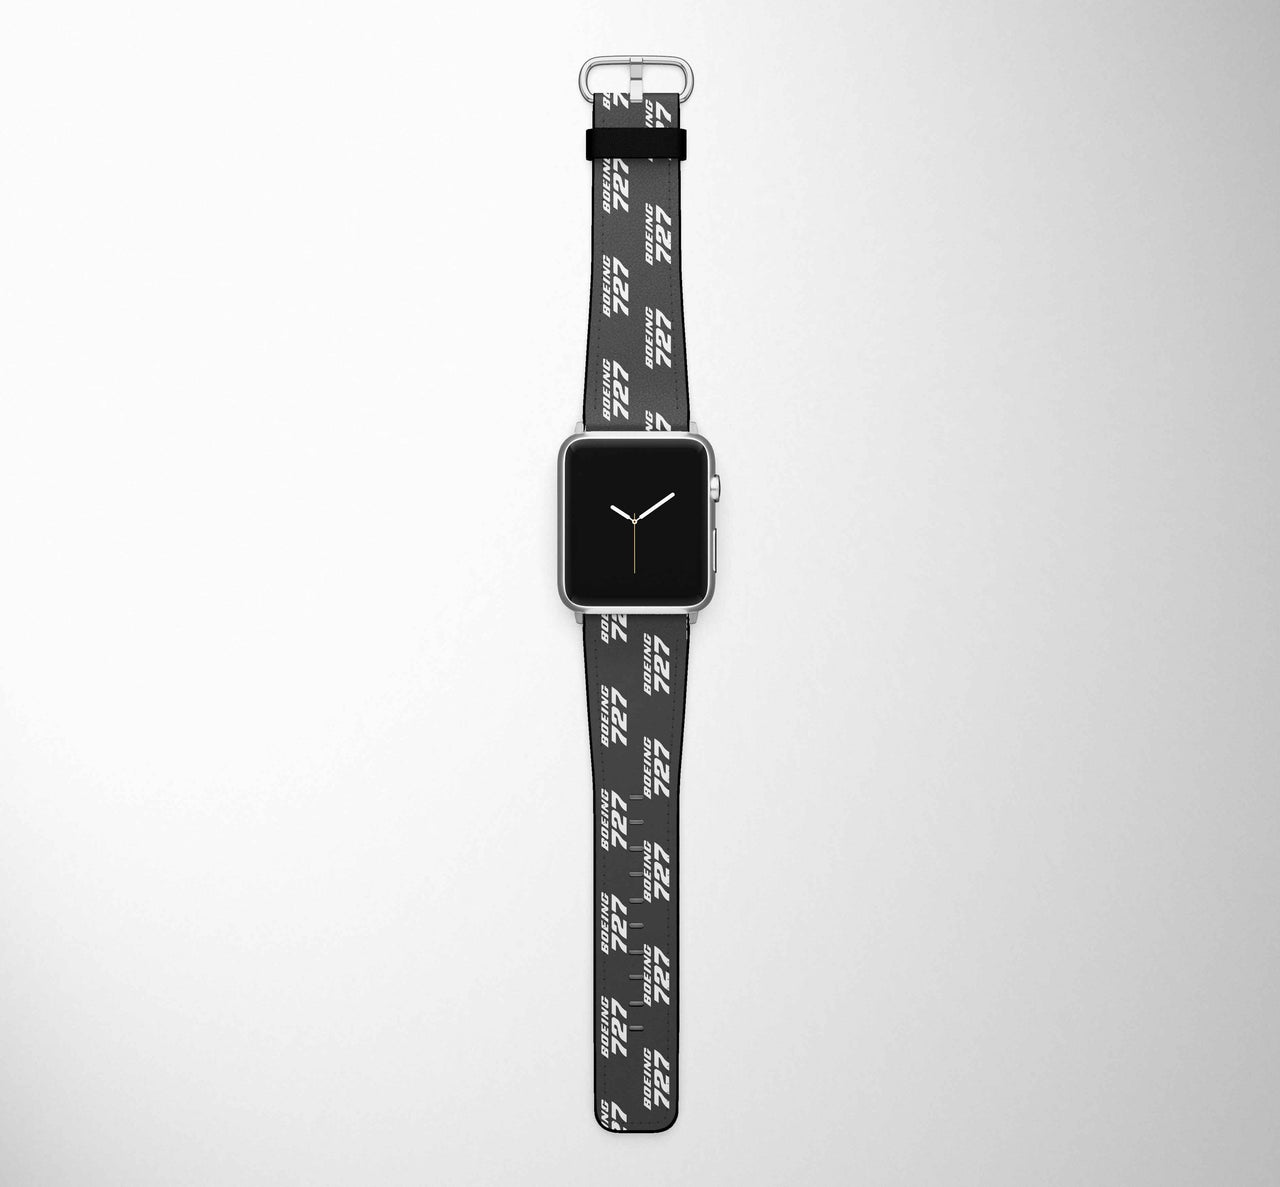 Boeing 727 & Text Designed Leather Apple Watch Straps